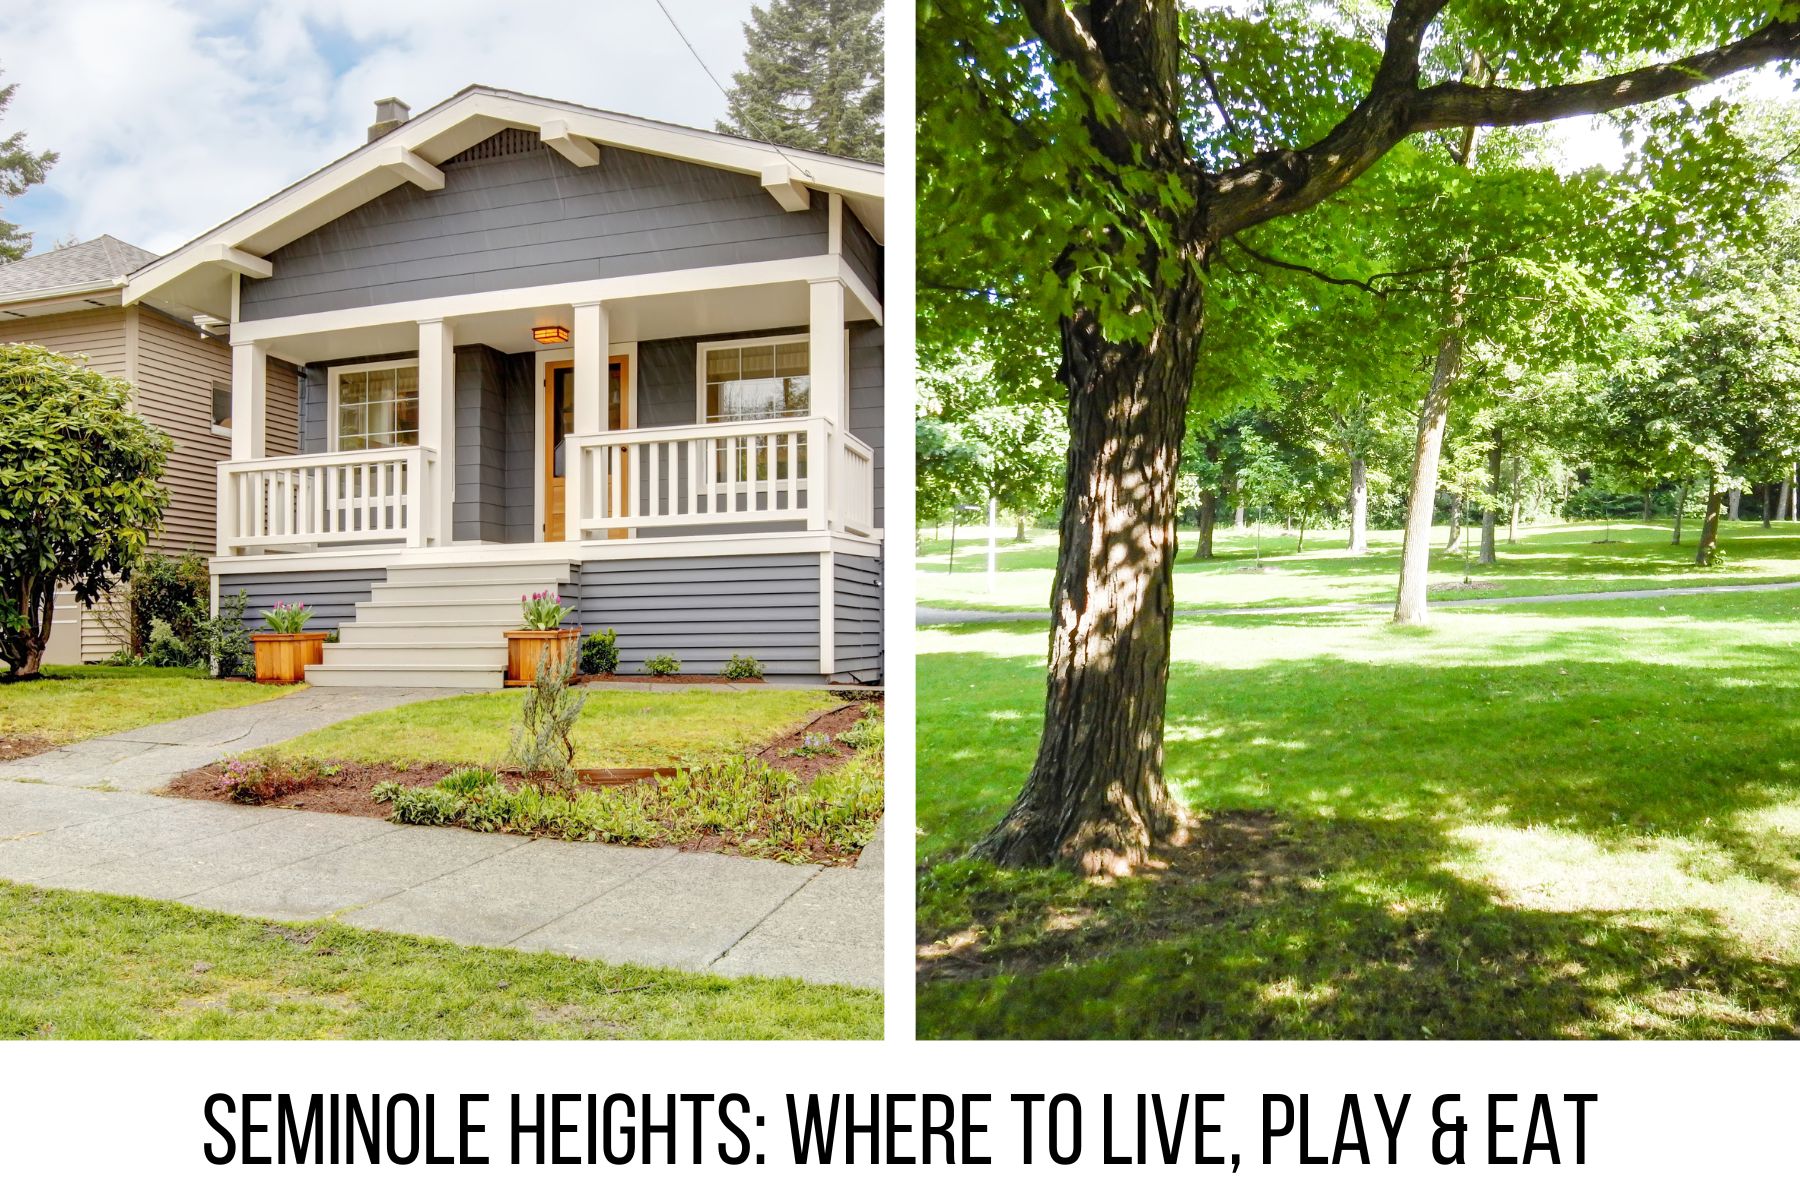 Seminole Heights: Where to live, play & eat